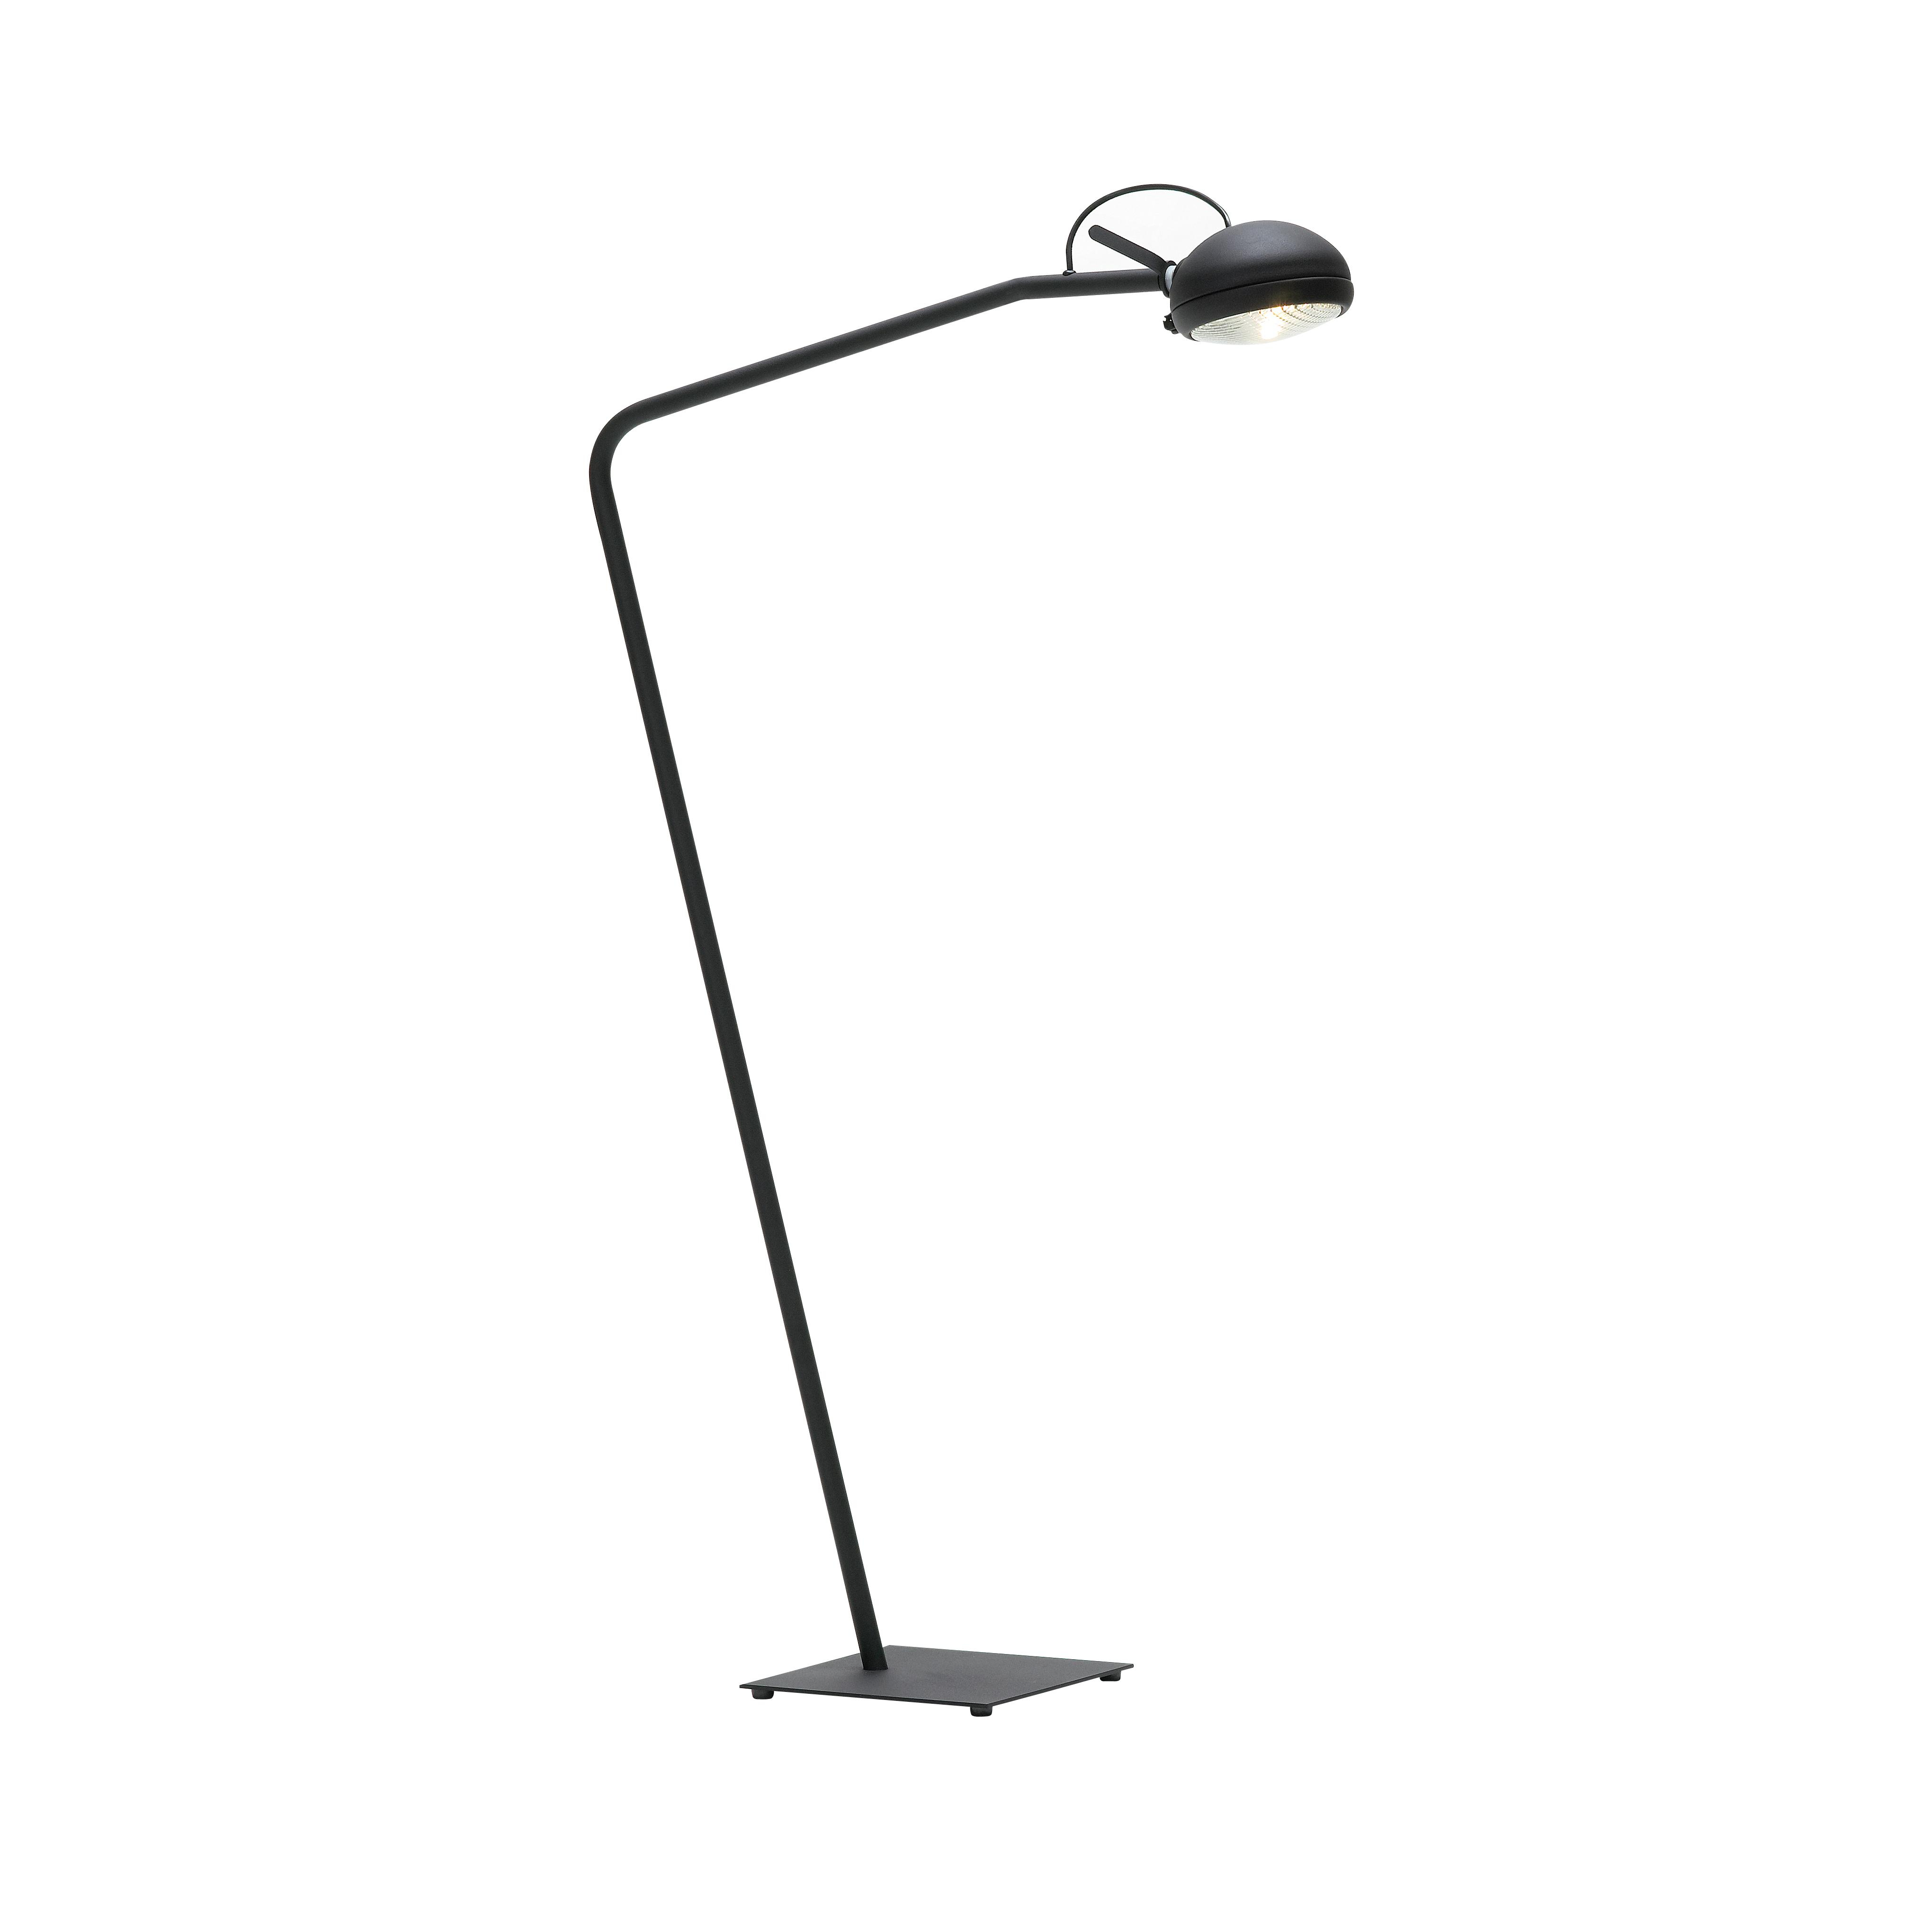 Jacco Maris Stand Alone Floor Lamp In Powder Black Finish within measurements 4080 X 4080